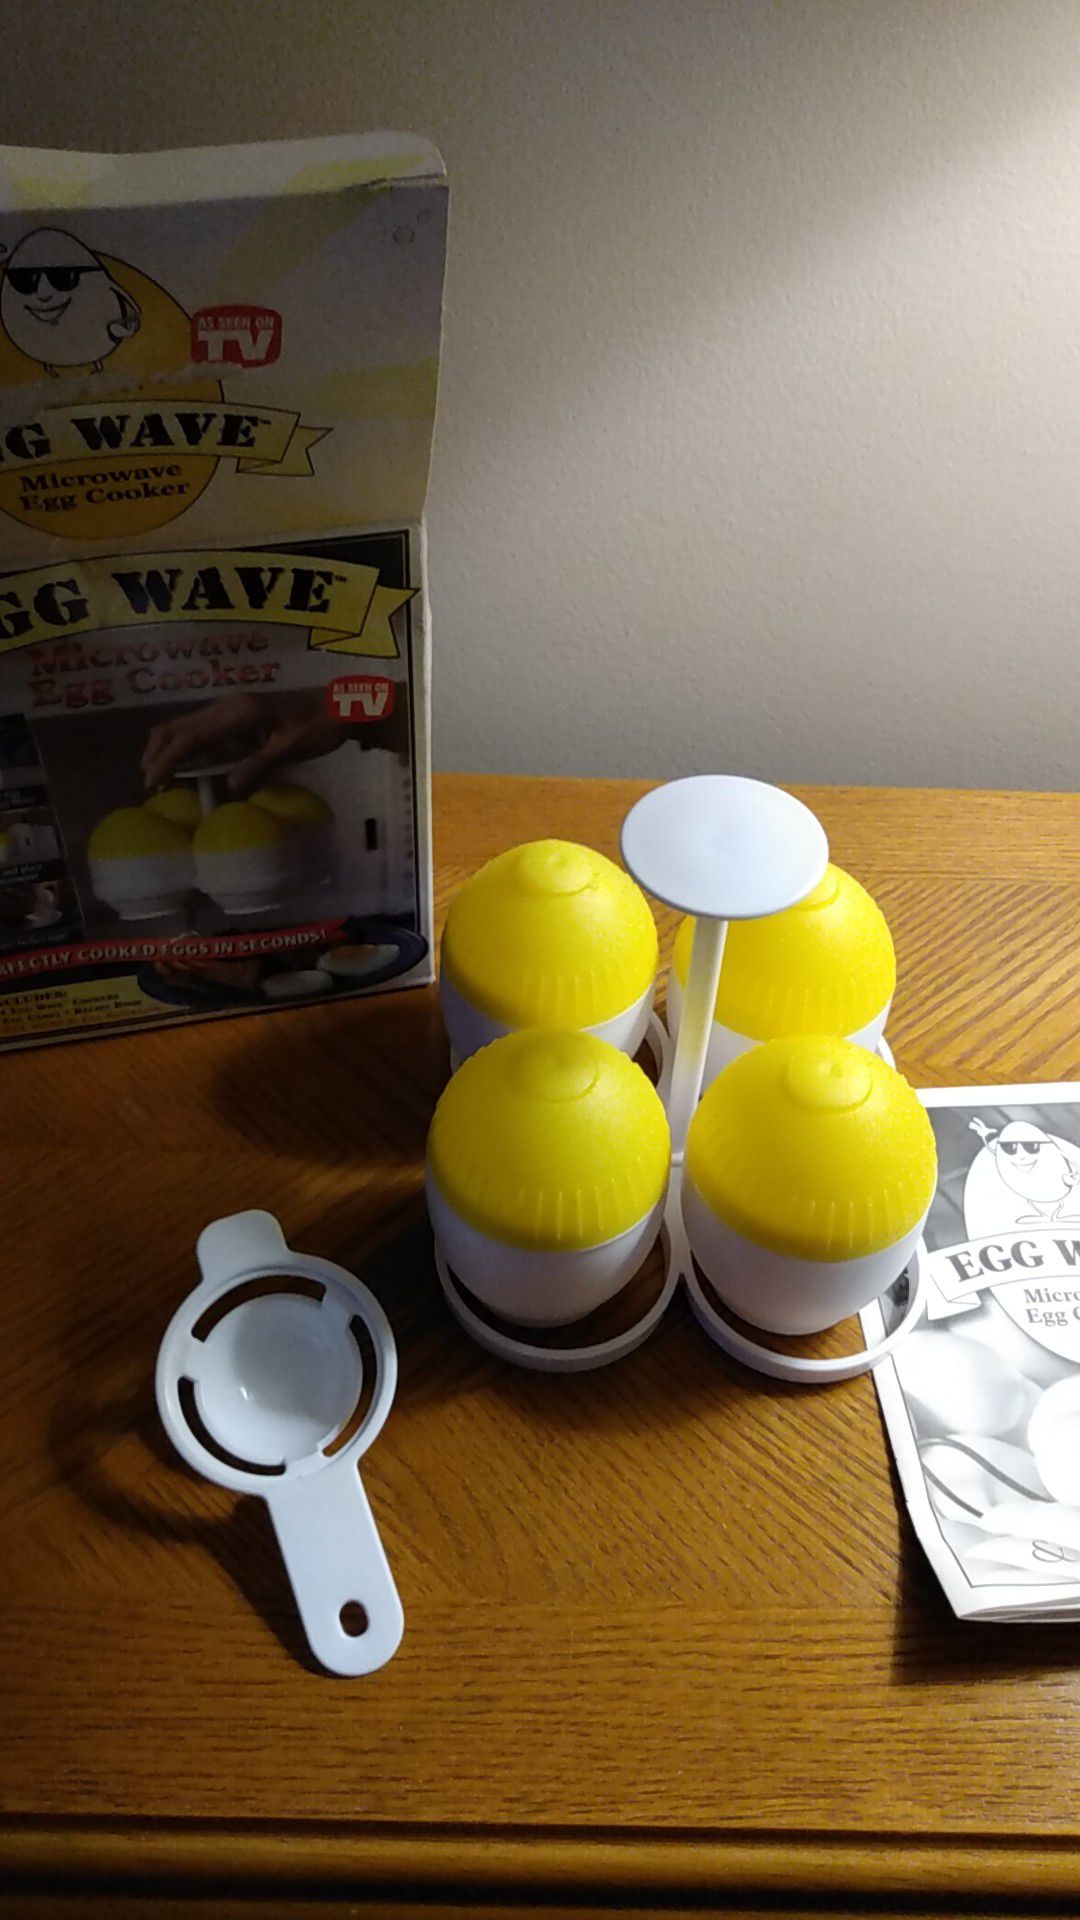 Egg-Tastic Ceramic Microwave Egg Cooker for Sale in Waltham, MA - OfferUp